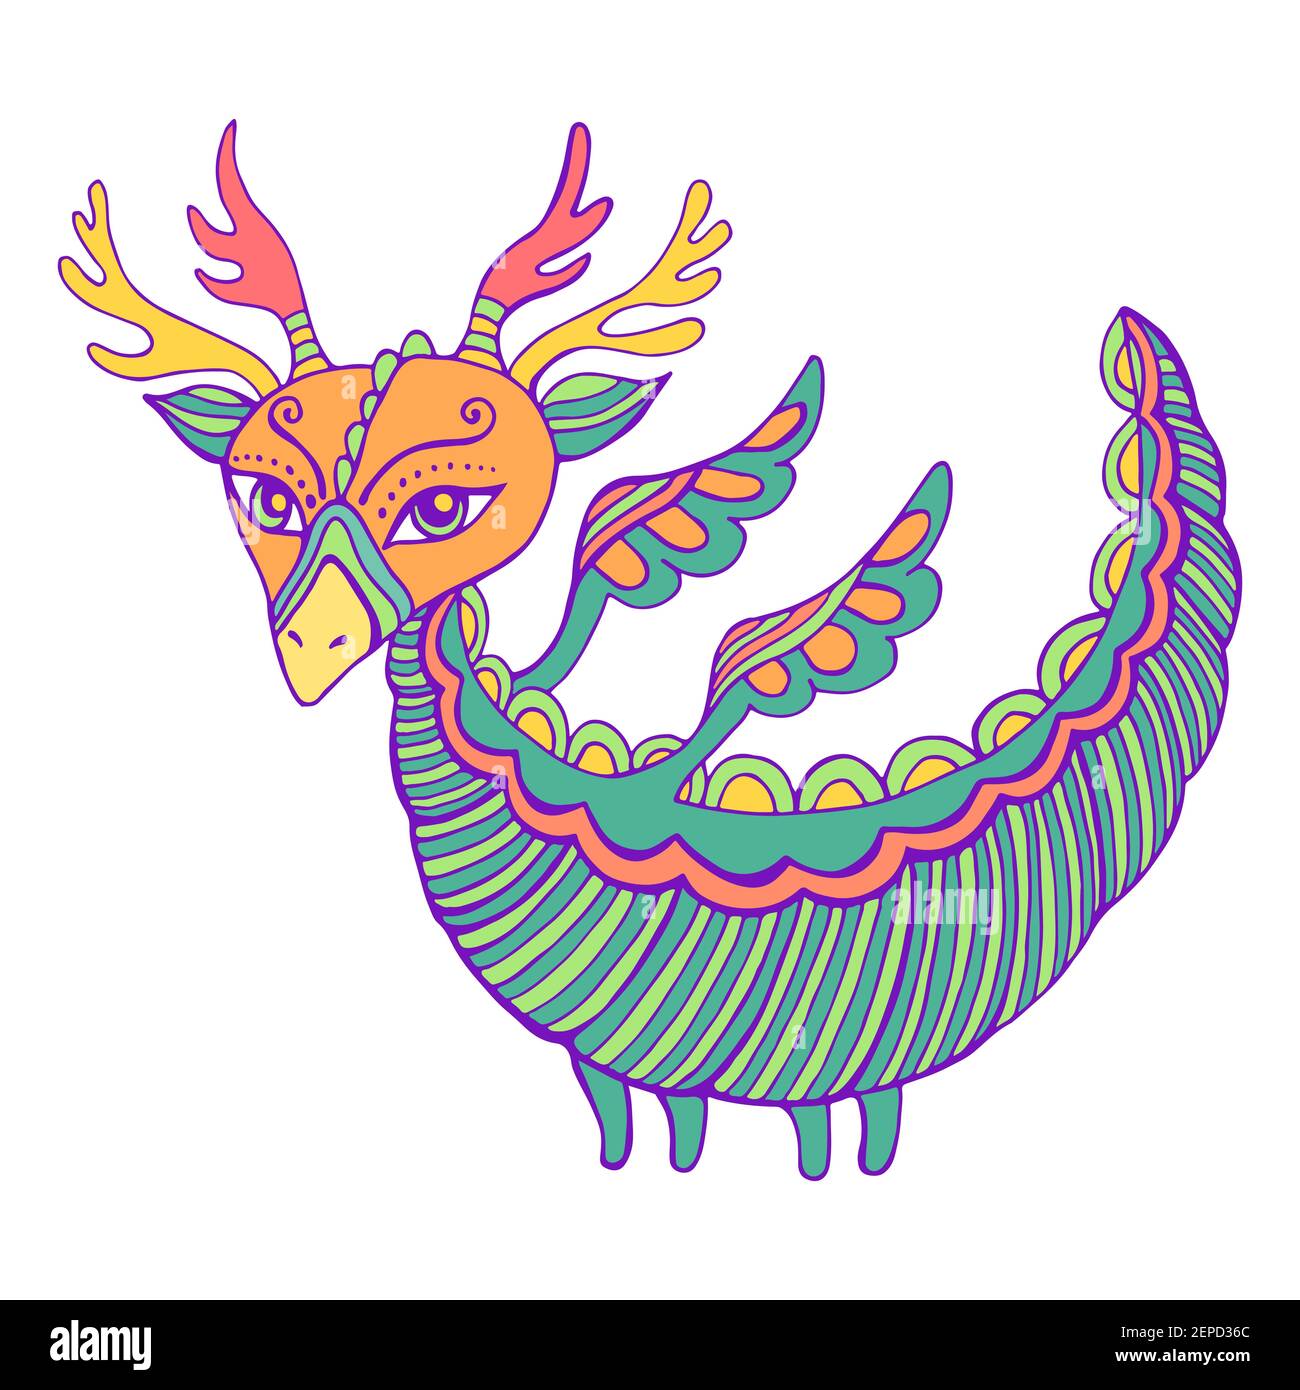 Fantastic colorful Dragon with wings, horns and tails. Stock Vector